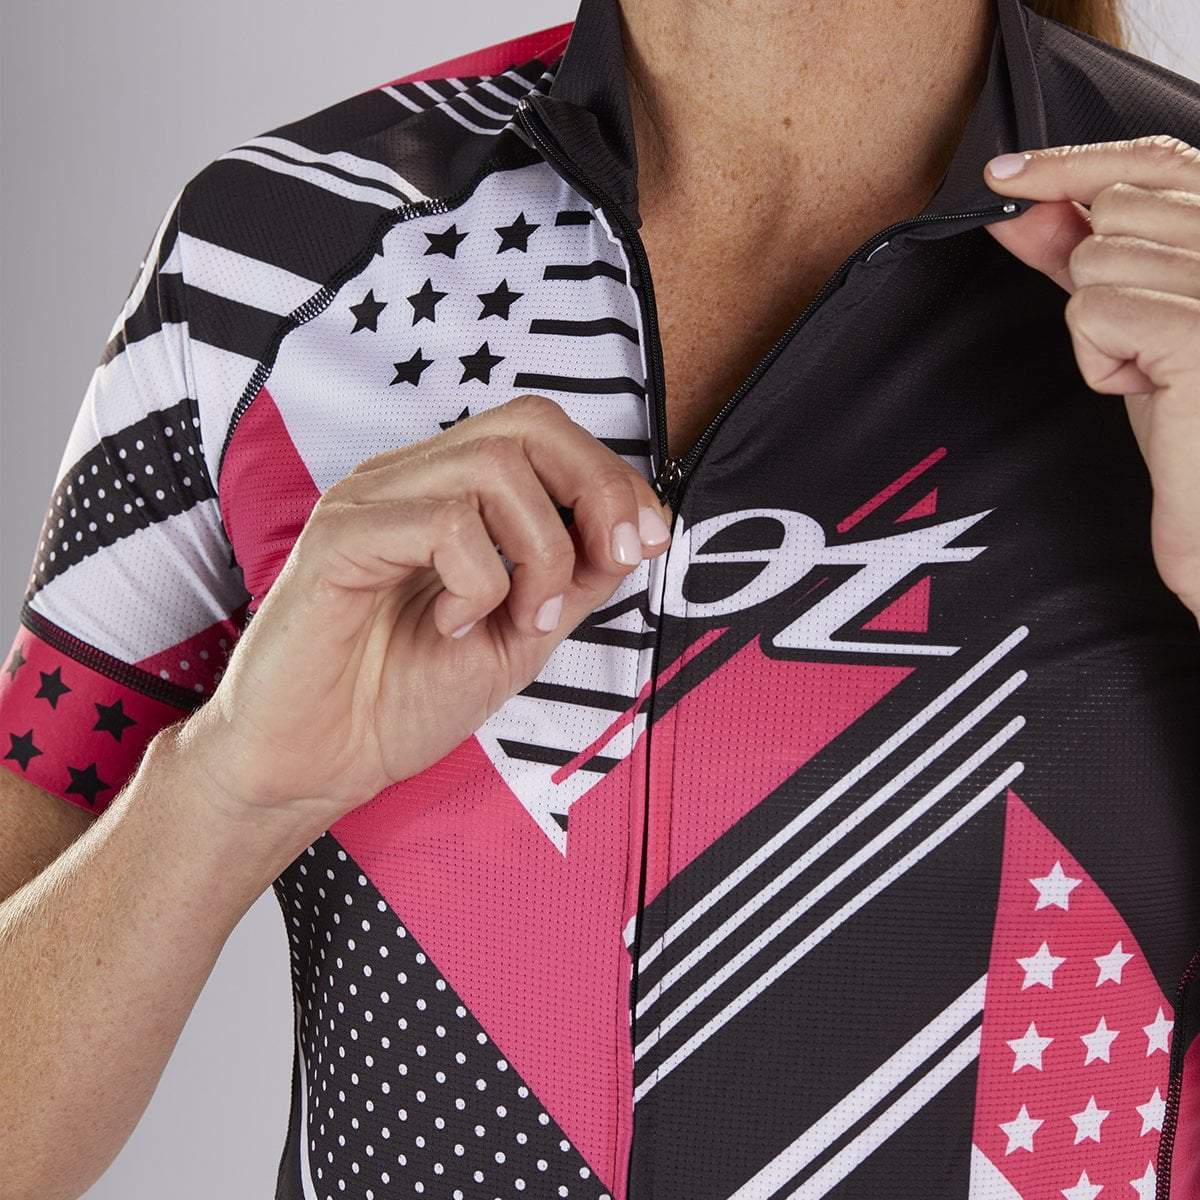 Zoot Sports CYCLE APPAREL WOMENS LTD CYCLE JERSEY - TEAM 19